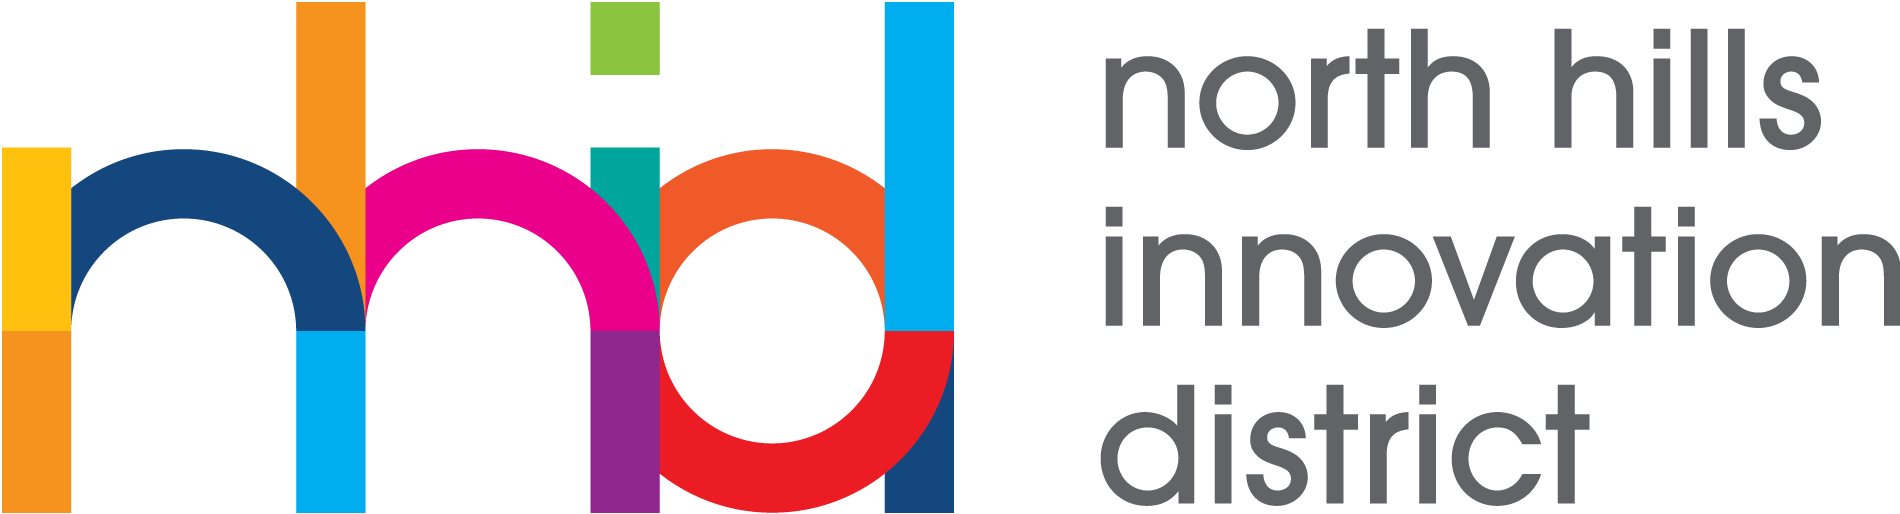 North Hills Innovation District (NHID)